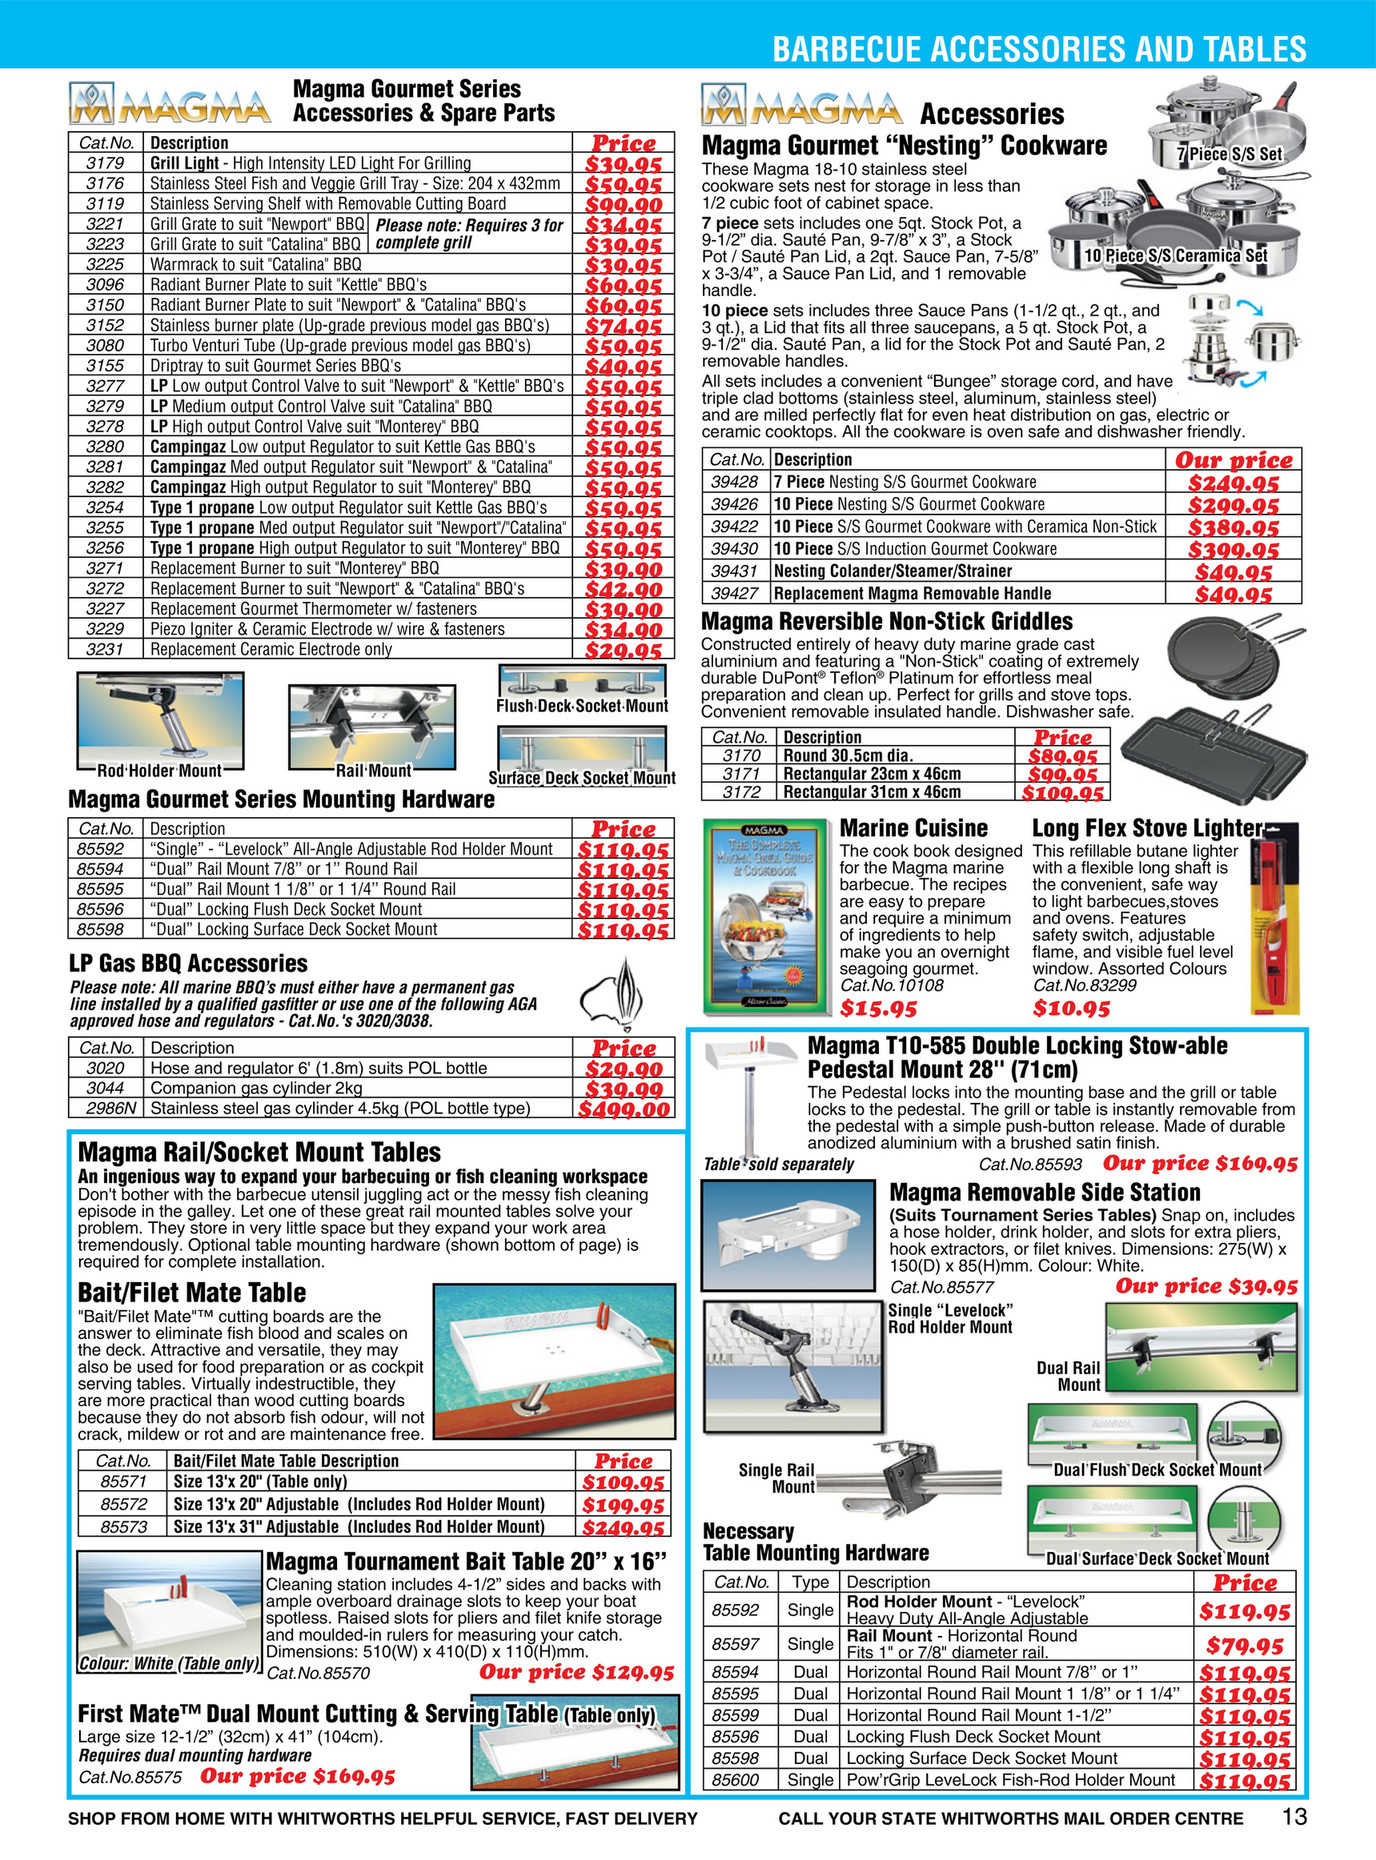 Whitworths - 2016/2017 Summer Discount Boating Bargain Book - Page 4-5 -  Created with Publitas.com